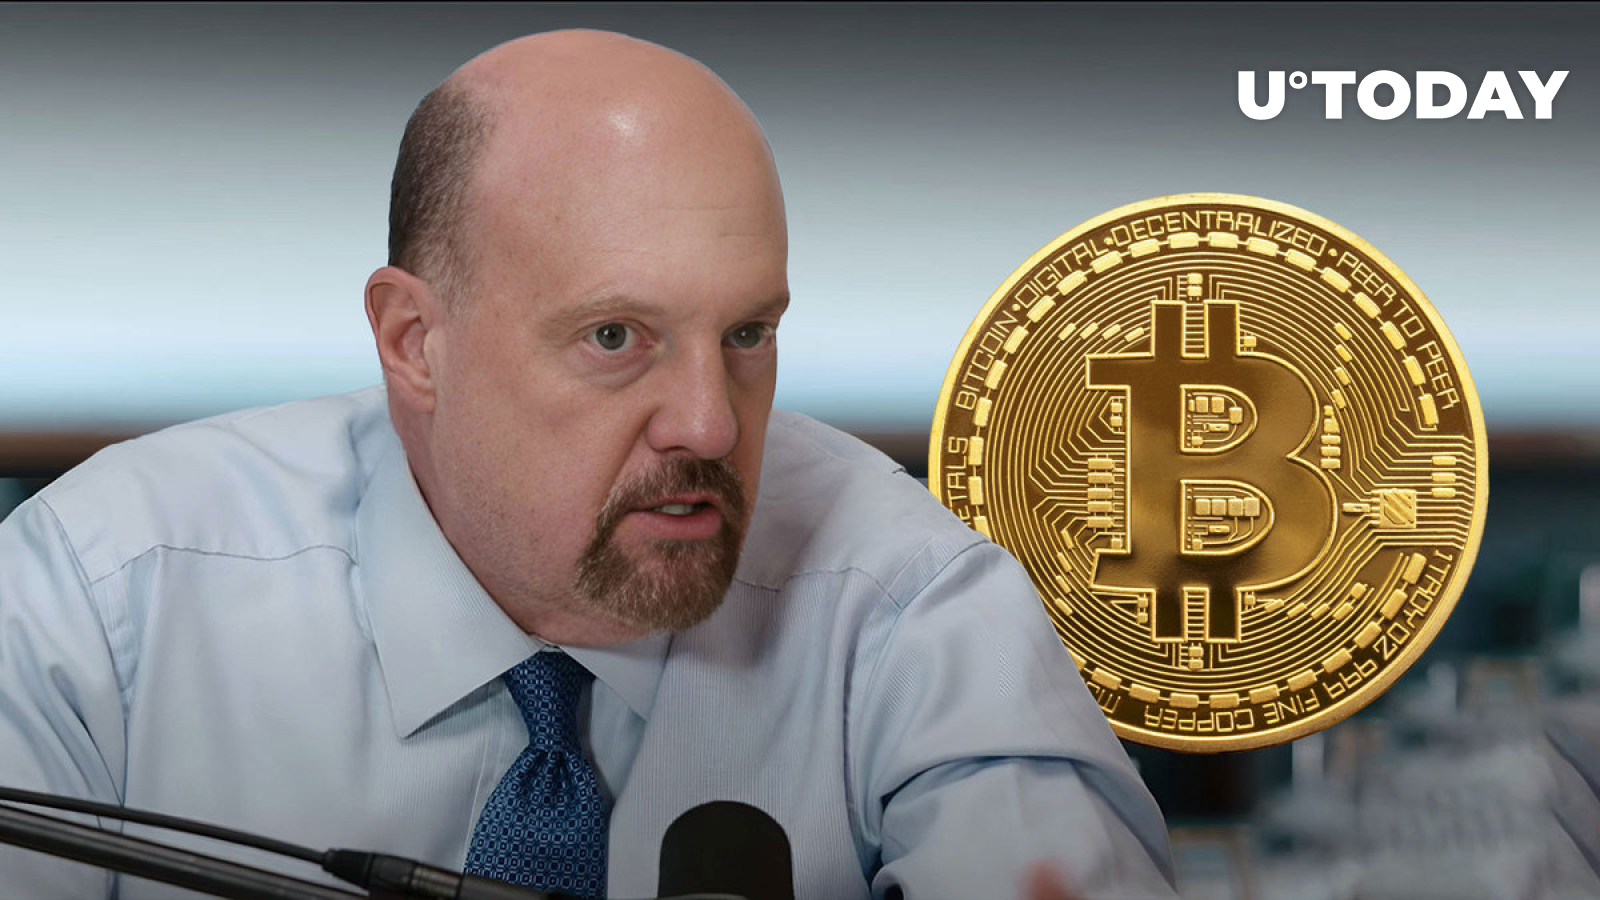 Bitcoin (BTC) Price Goes Green Amid Cold Call From CNBC’s Jim Cramer